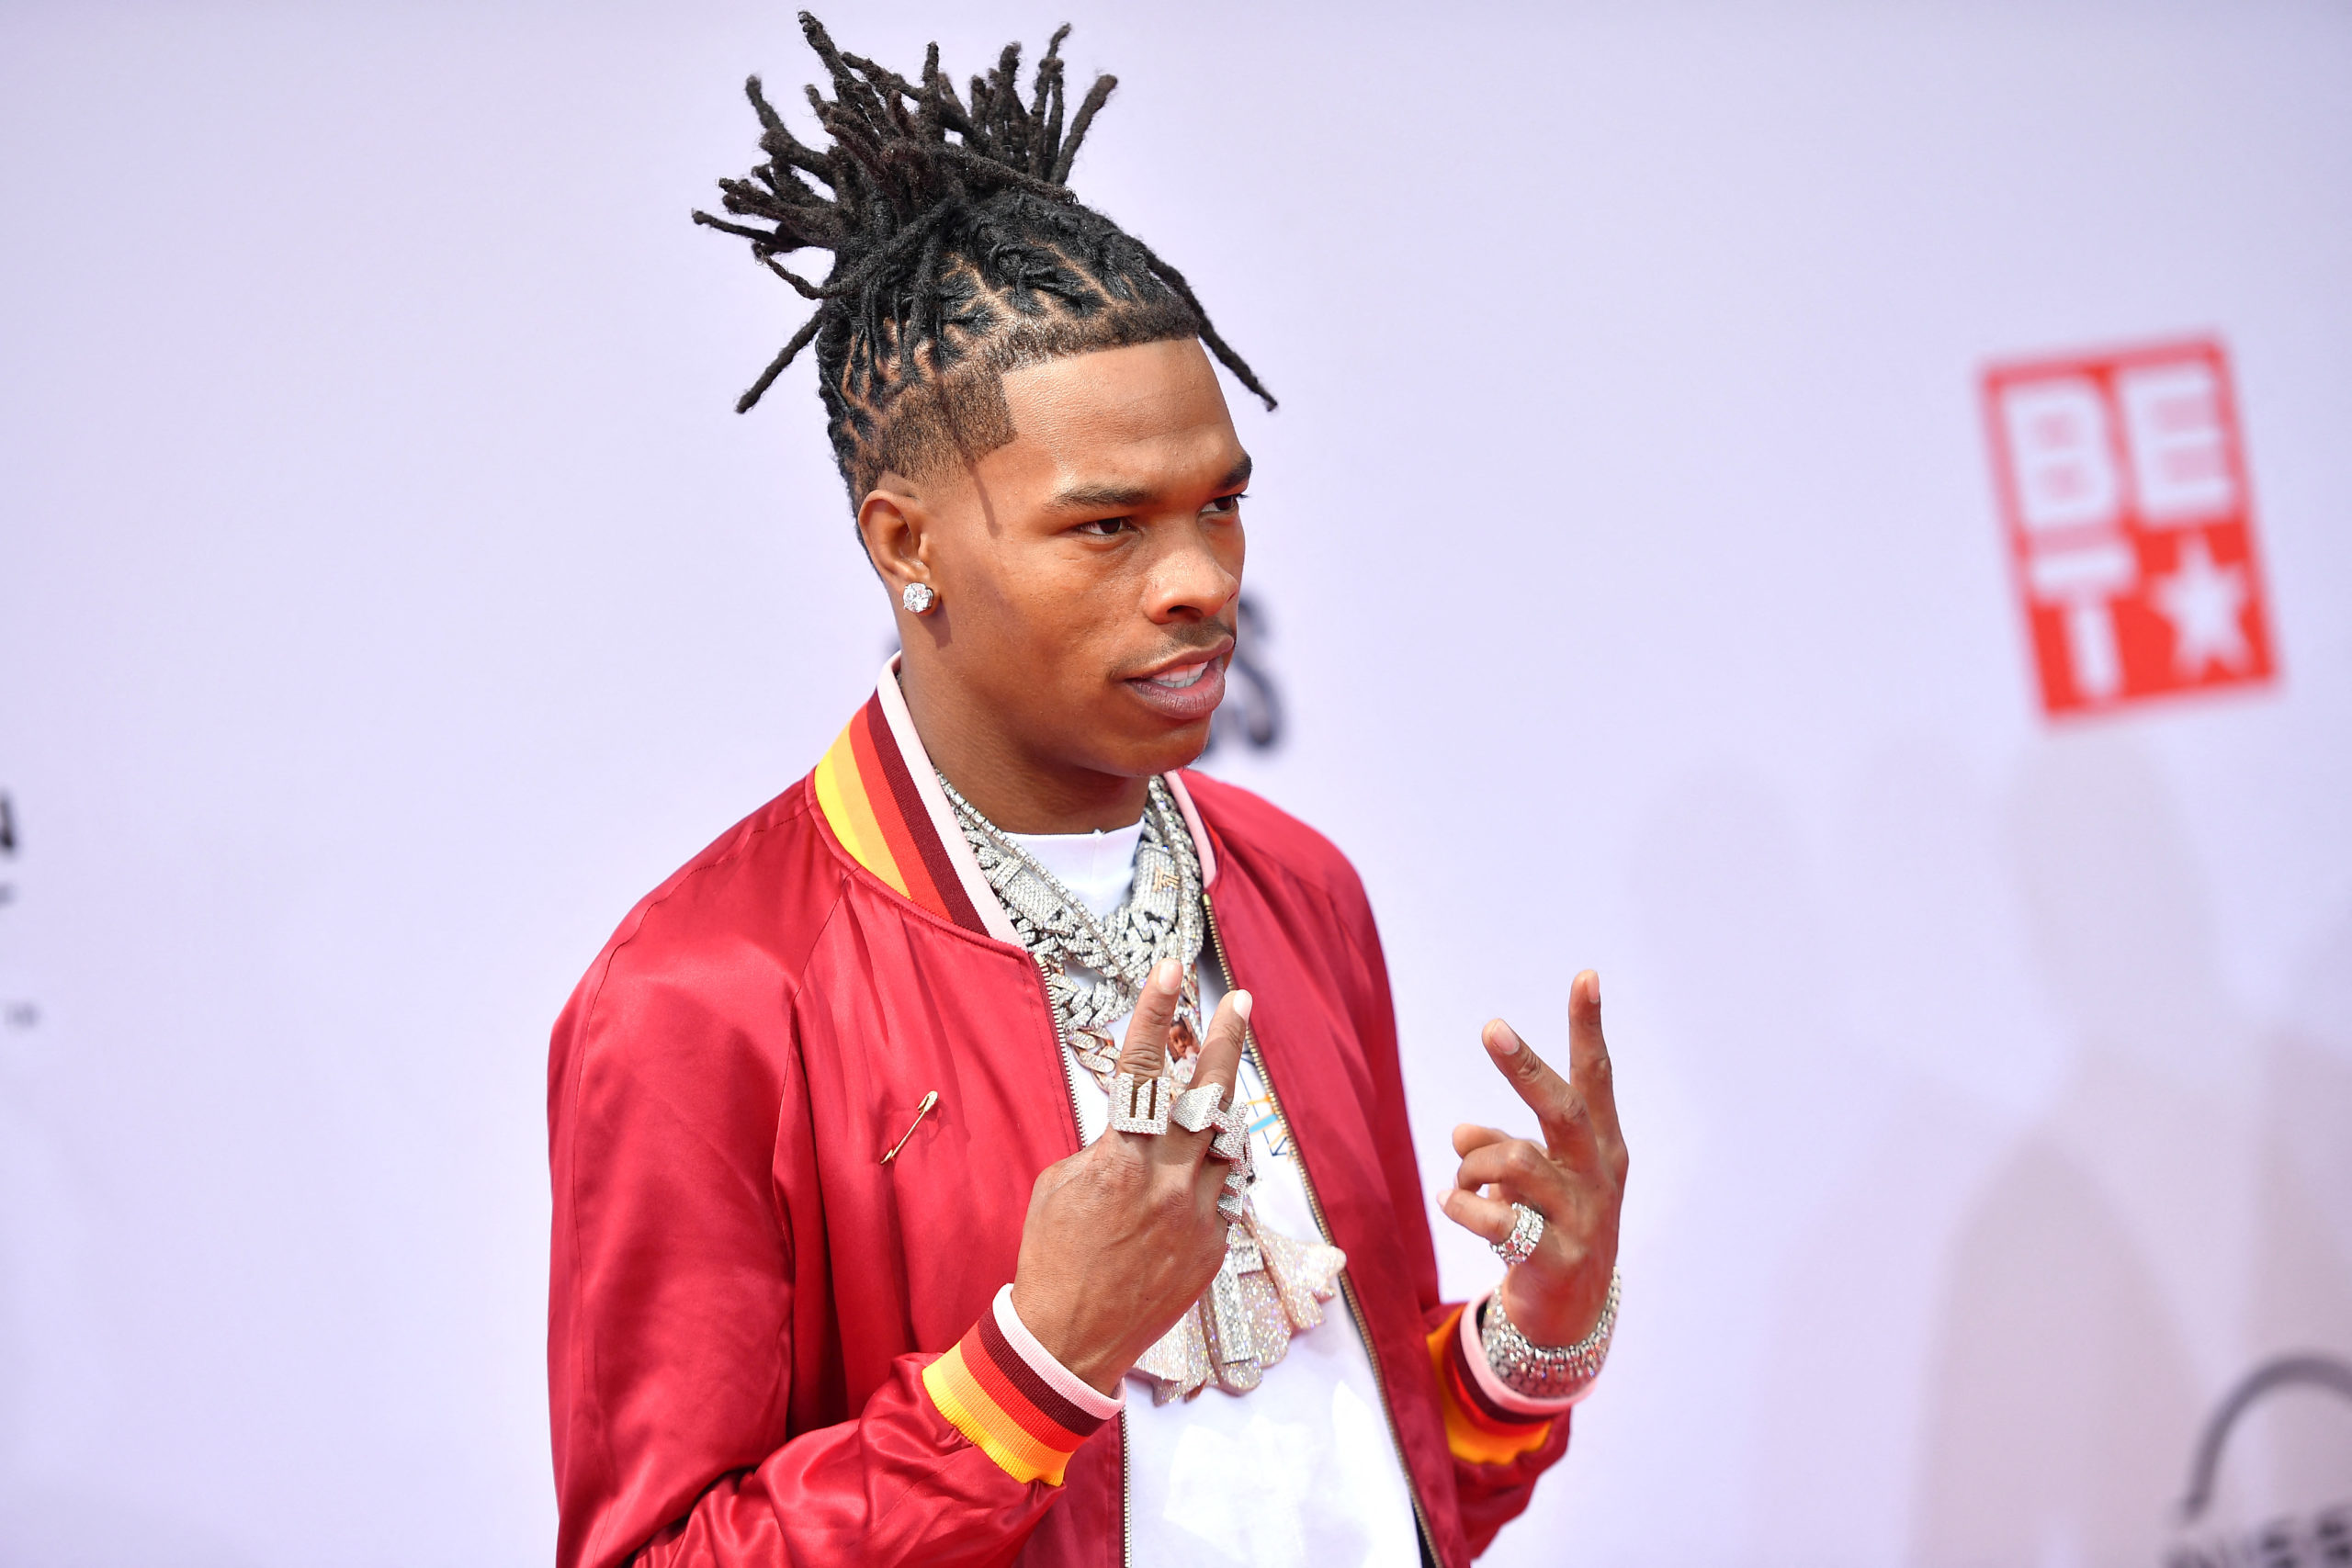 Lil Baby attends the BET Awards 2021 at Microsoft Theater on June 27, 2021 in Los Angeles, California.  